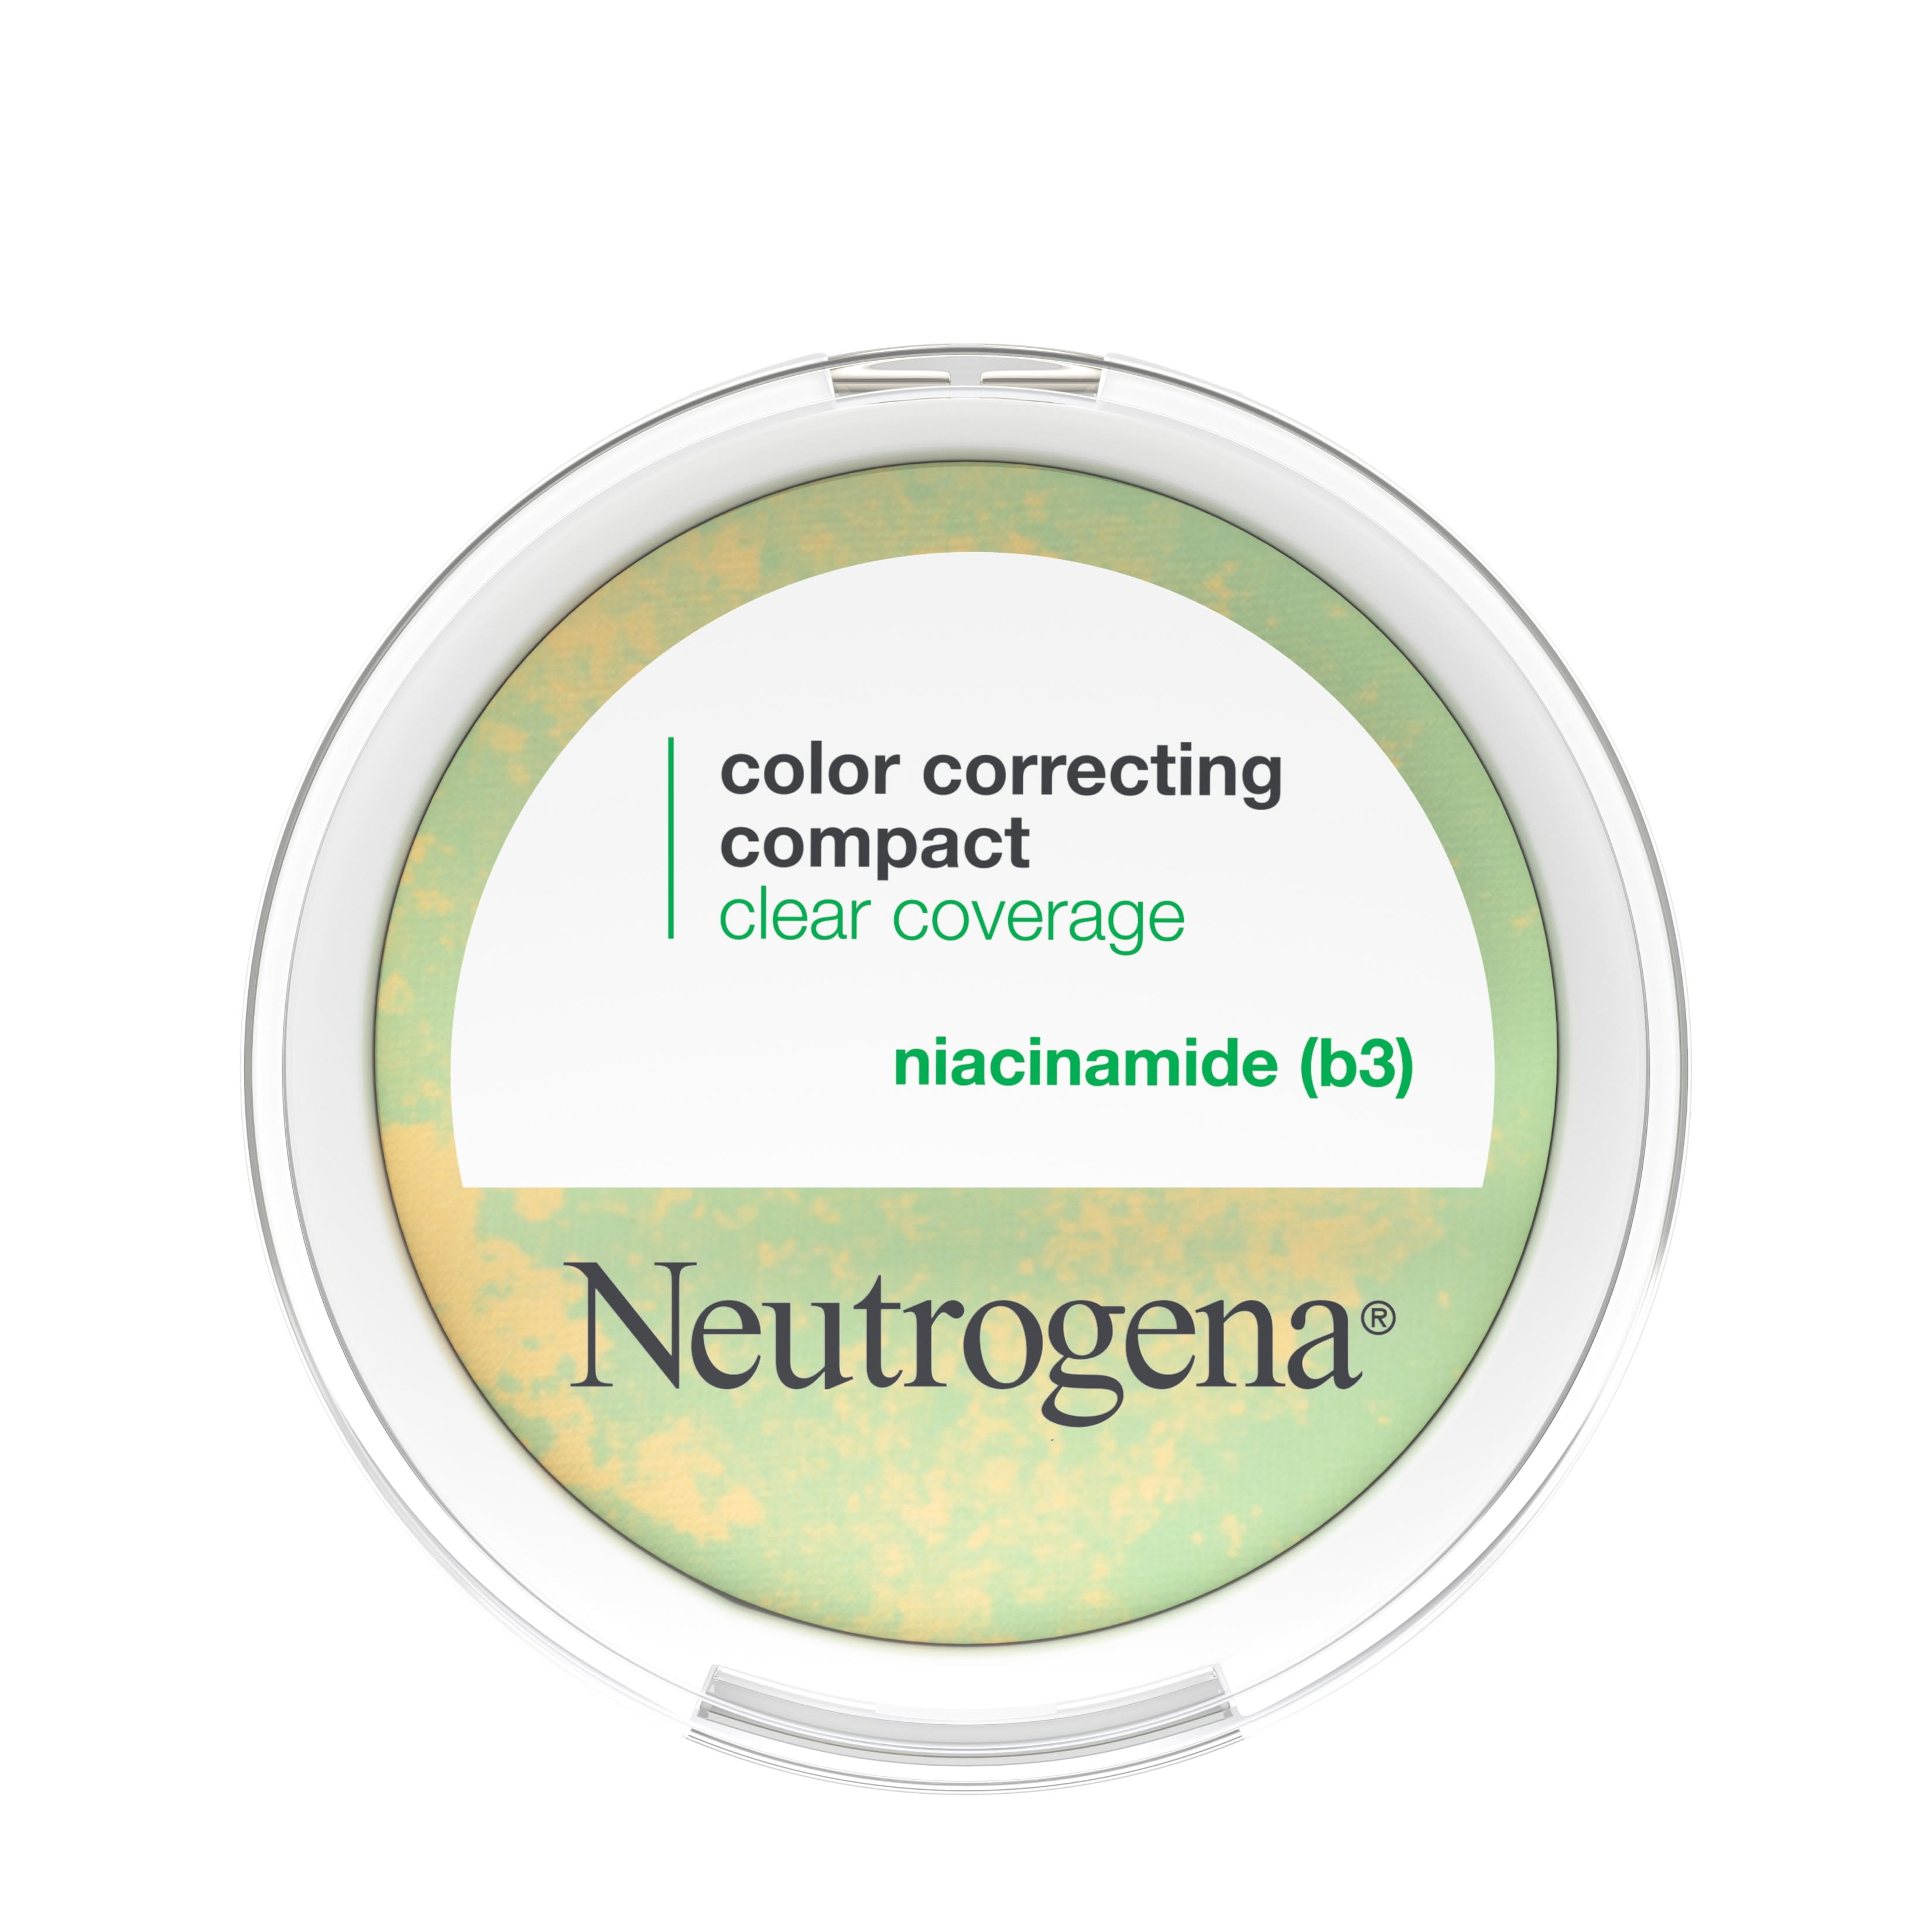 Neutrogena Clear Coverage Color Correcting Powder Compact, 0.38 oz